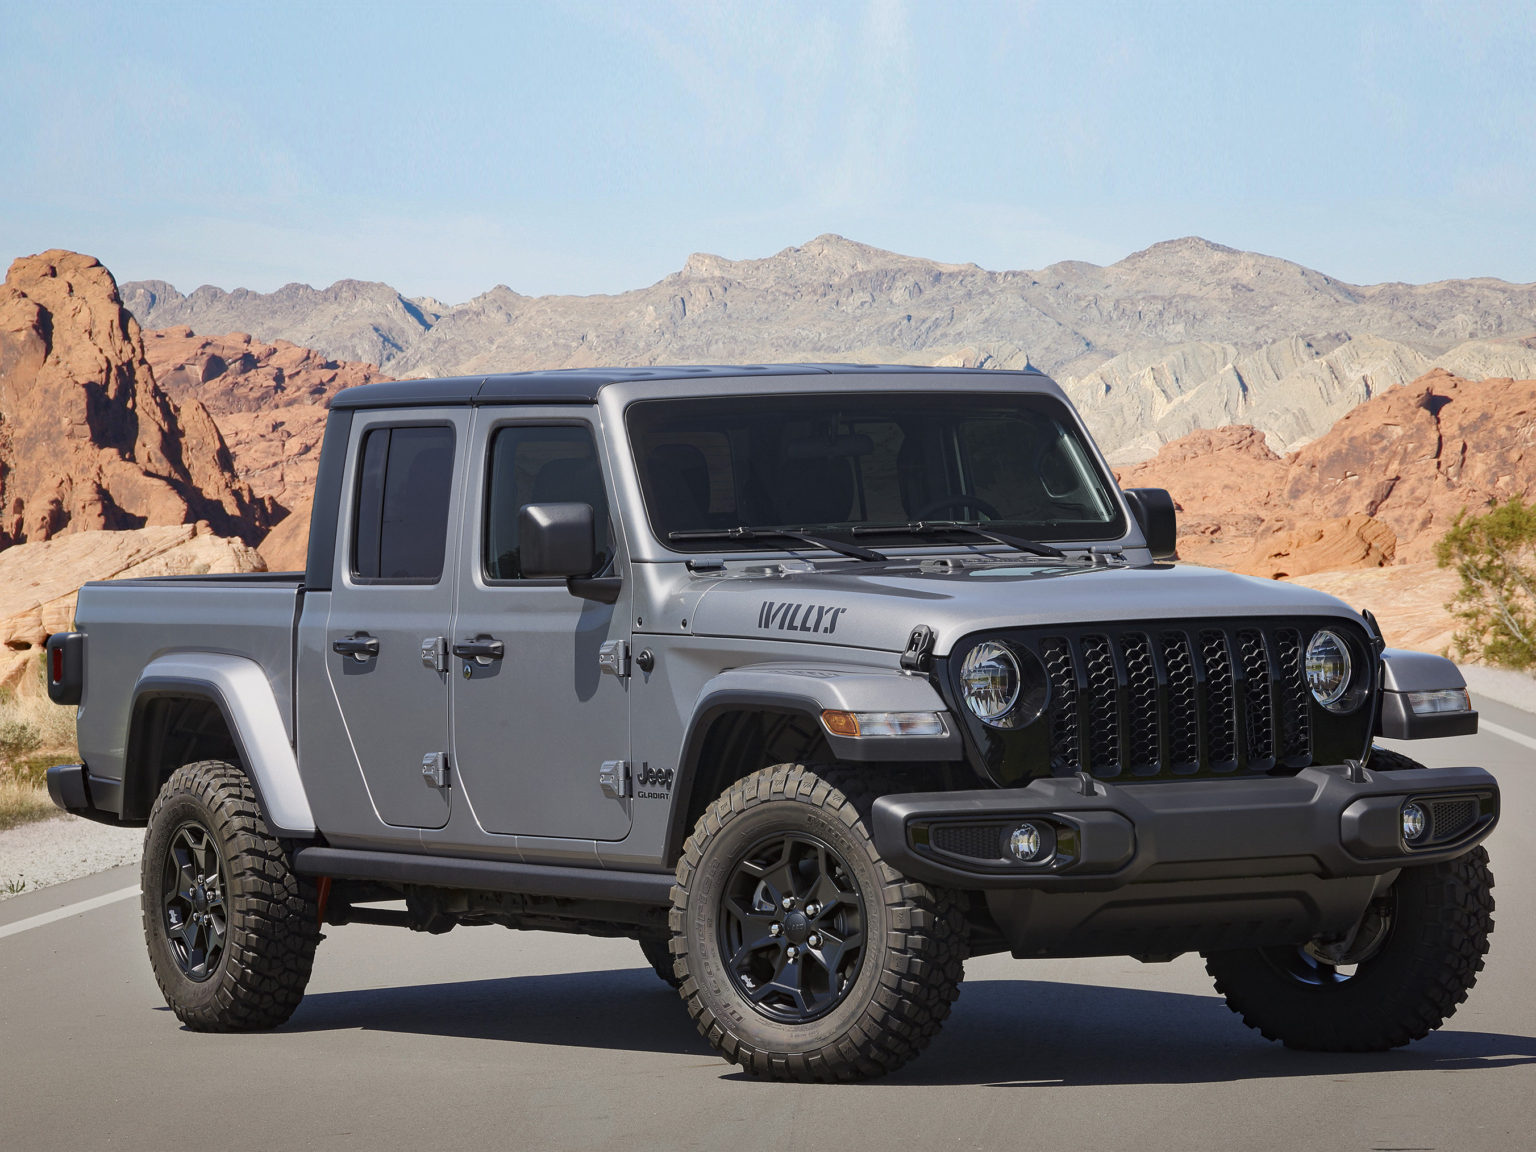 The Gladiator Willys offers off-roaders a way to get additional off-road prowess straight from the manufacturer without having to pay for a Rubicon model.